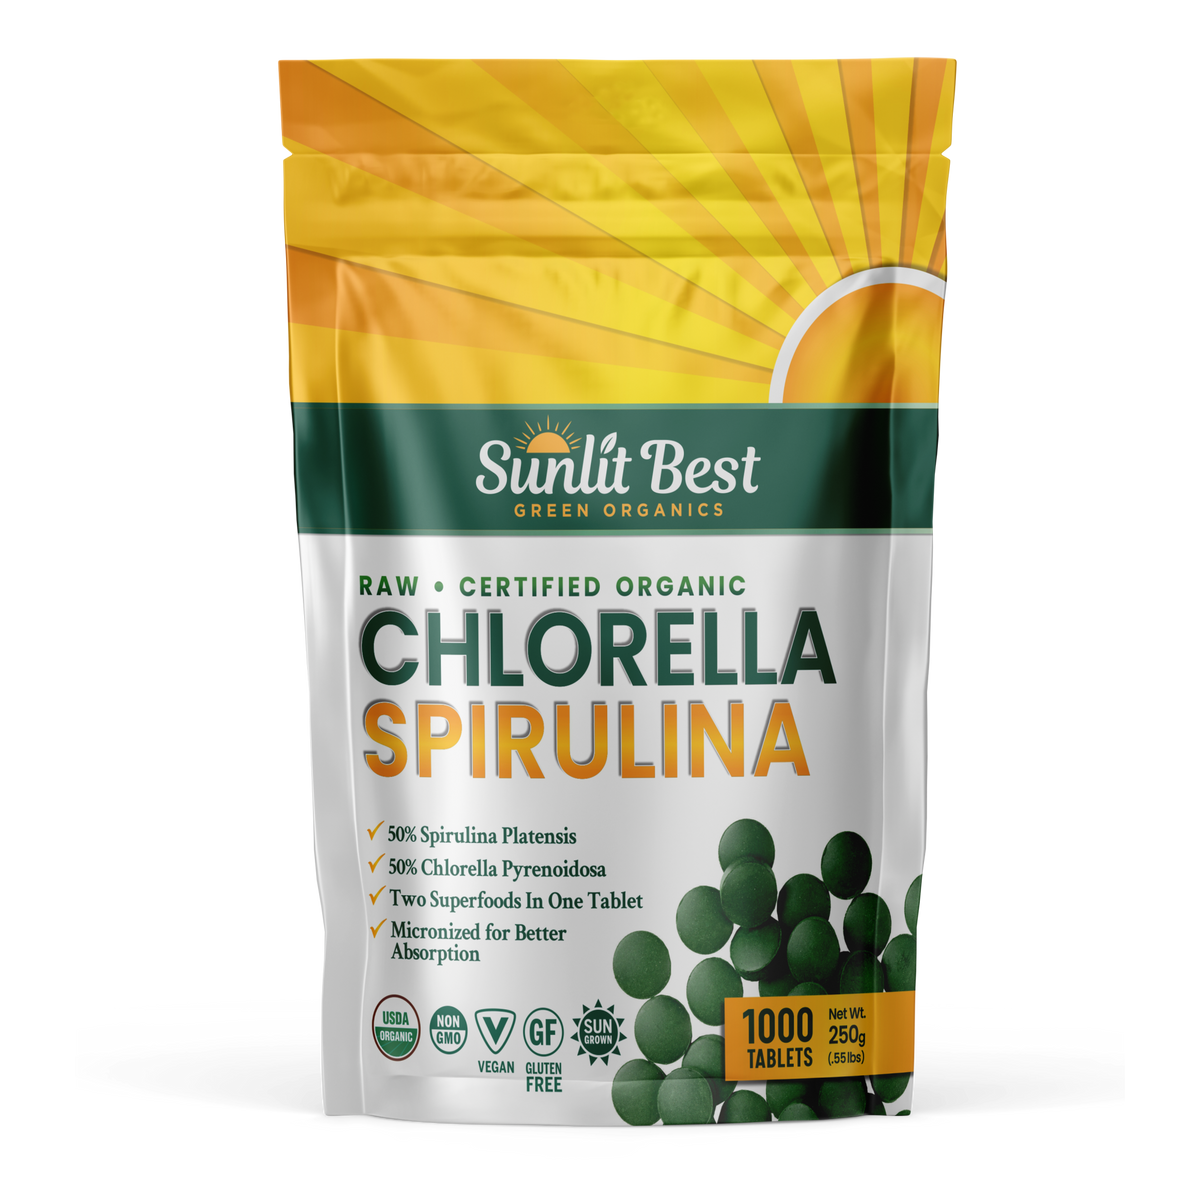 Chlorella Spirulina 50/50 (Mega-Pack 1000) Cracked Cell Wall, 100% Pure &amp; Clean, Organic Raw Non-GMO Green Superfood, Protien Packed, by Sunlit, Best Green Organics